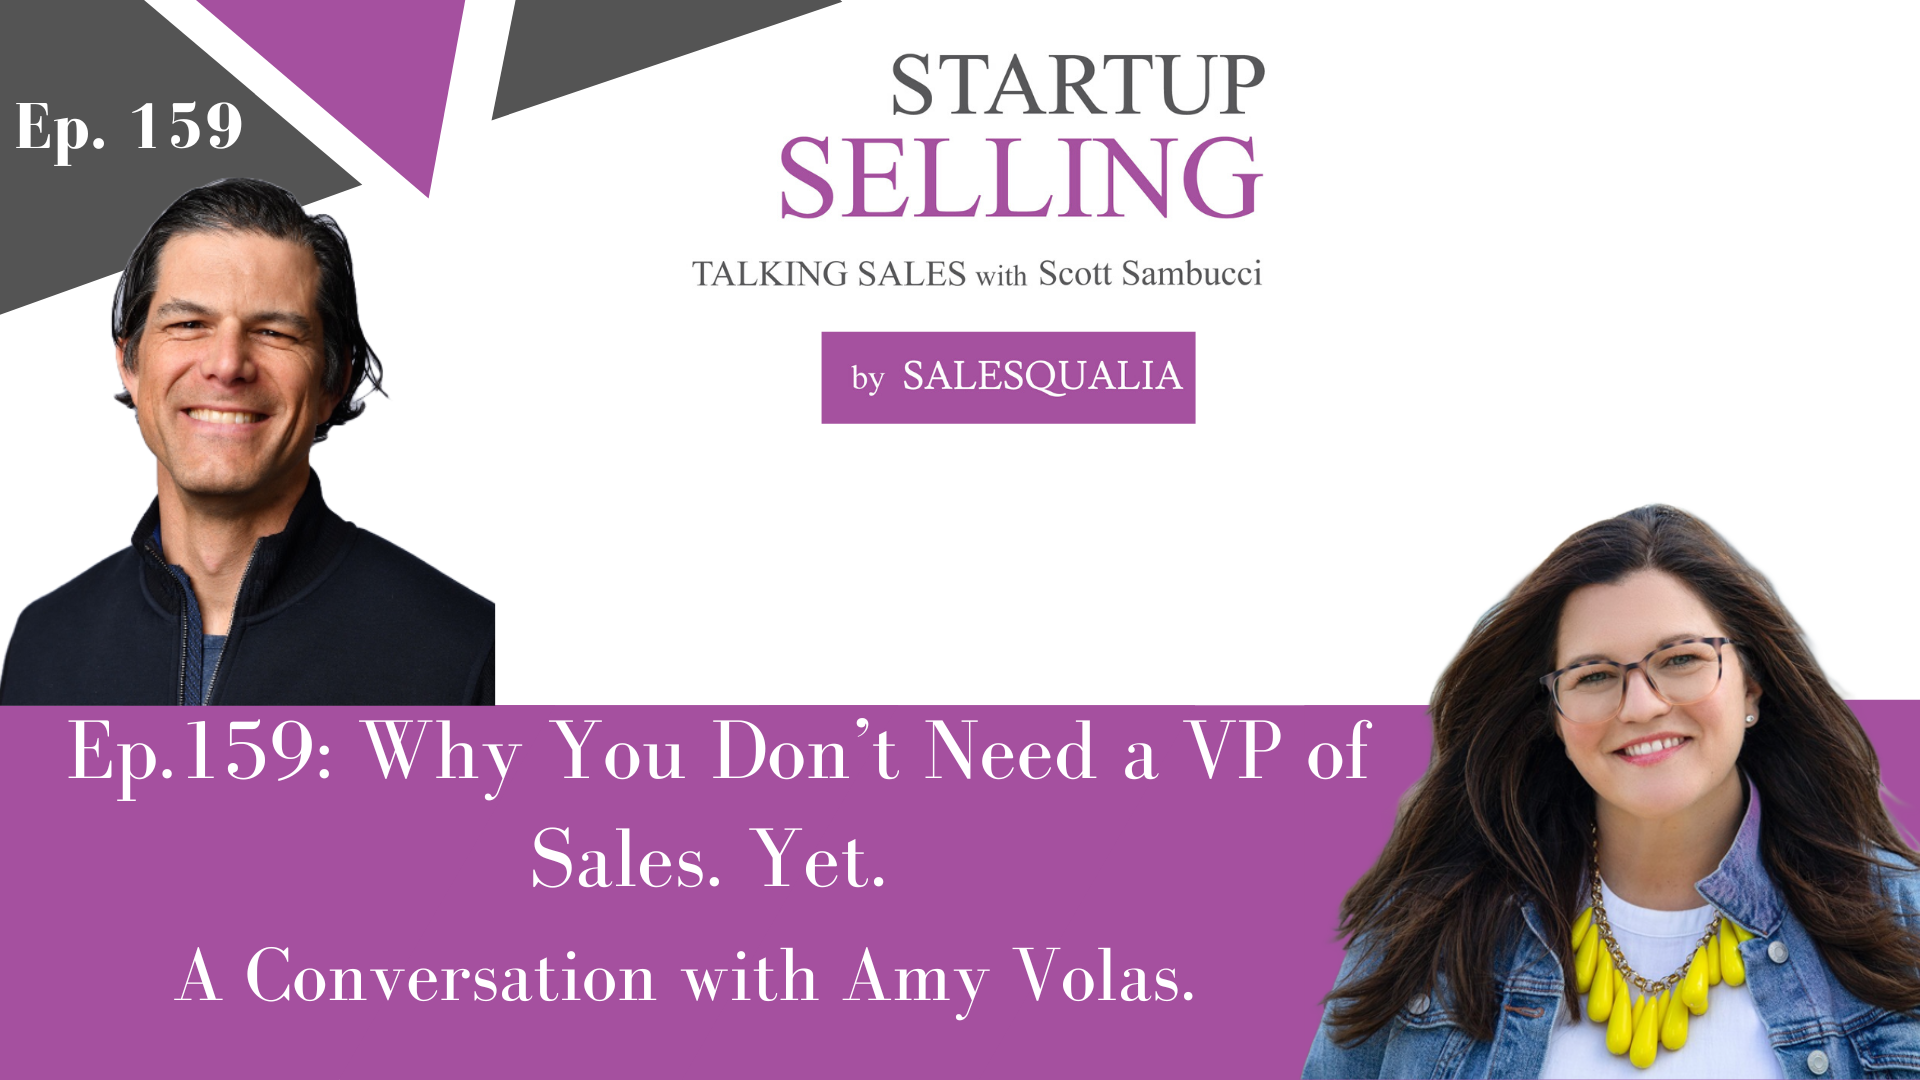 Ep.159: Why You Don’t Need a VP of Sales. Yet. A Conversation with Amy Volas.